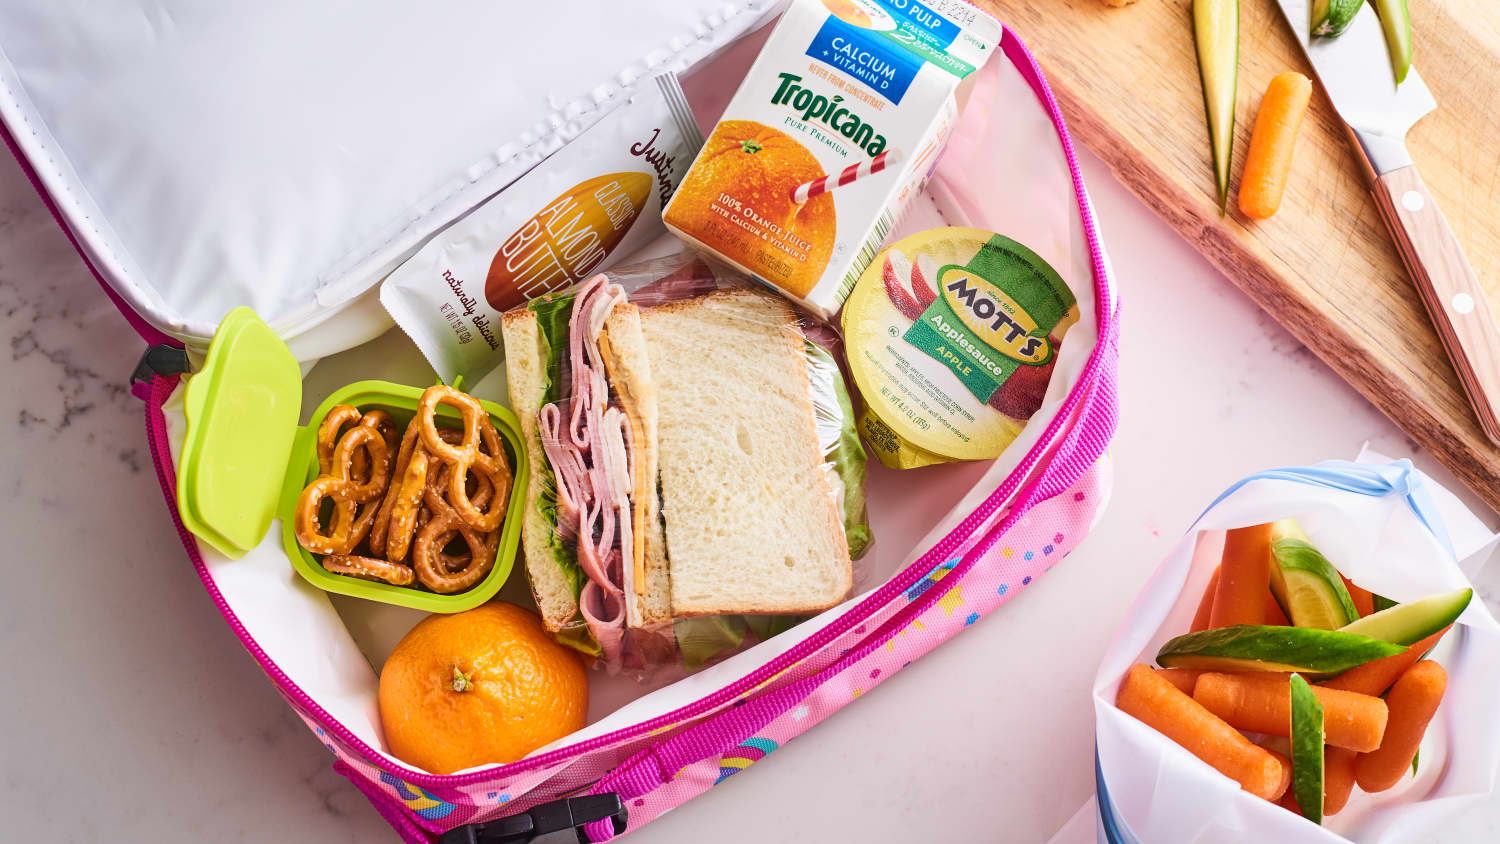 How to Keep Lunch Warm or Cold in The Lunchbox - Live Simply